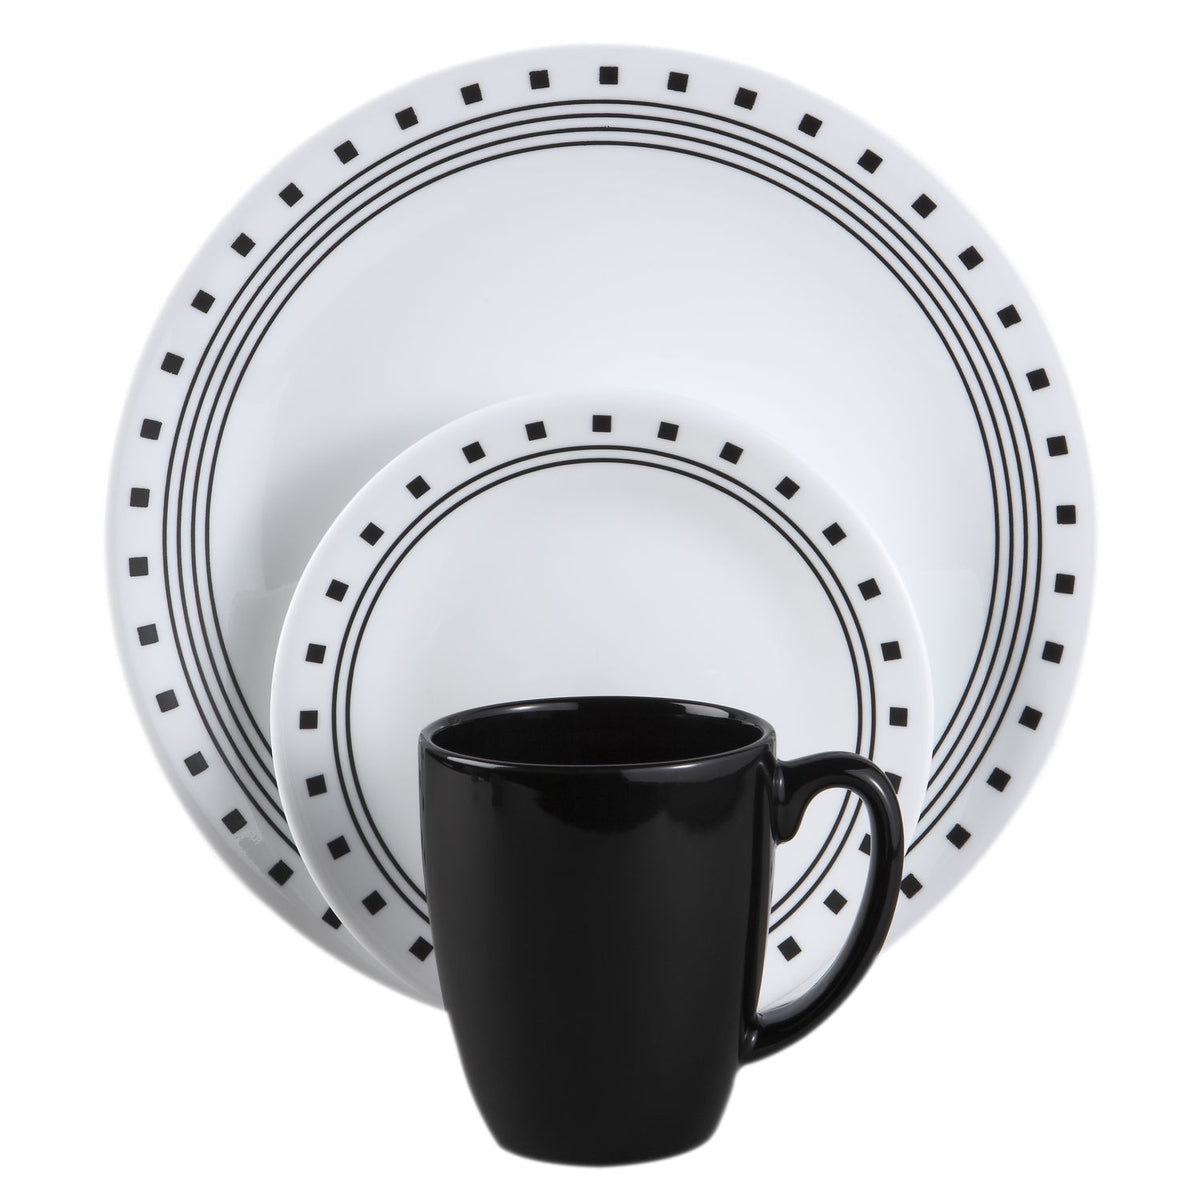 buy dinnerware sets at cheap rate in bulk. wholesale & retail kitchen essentials store.